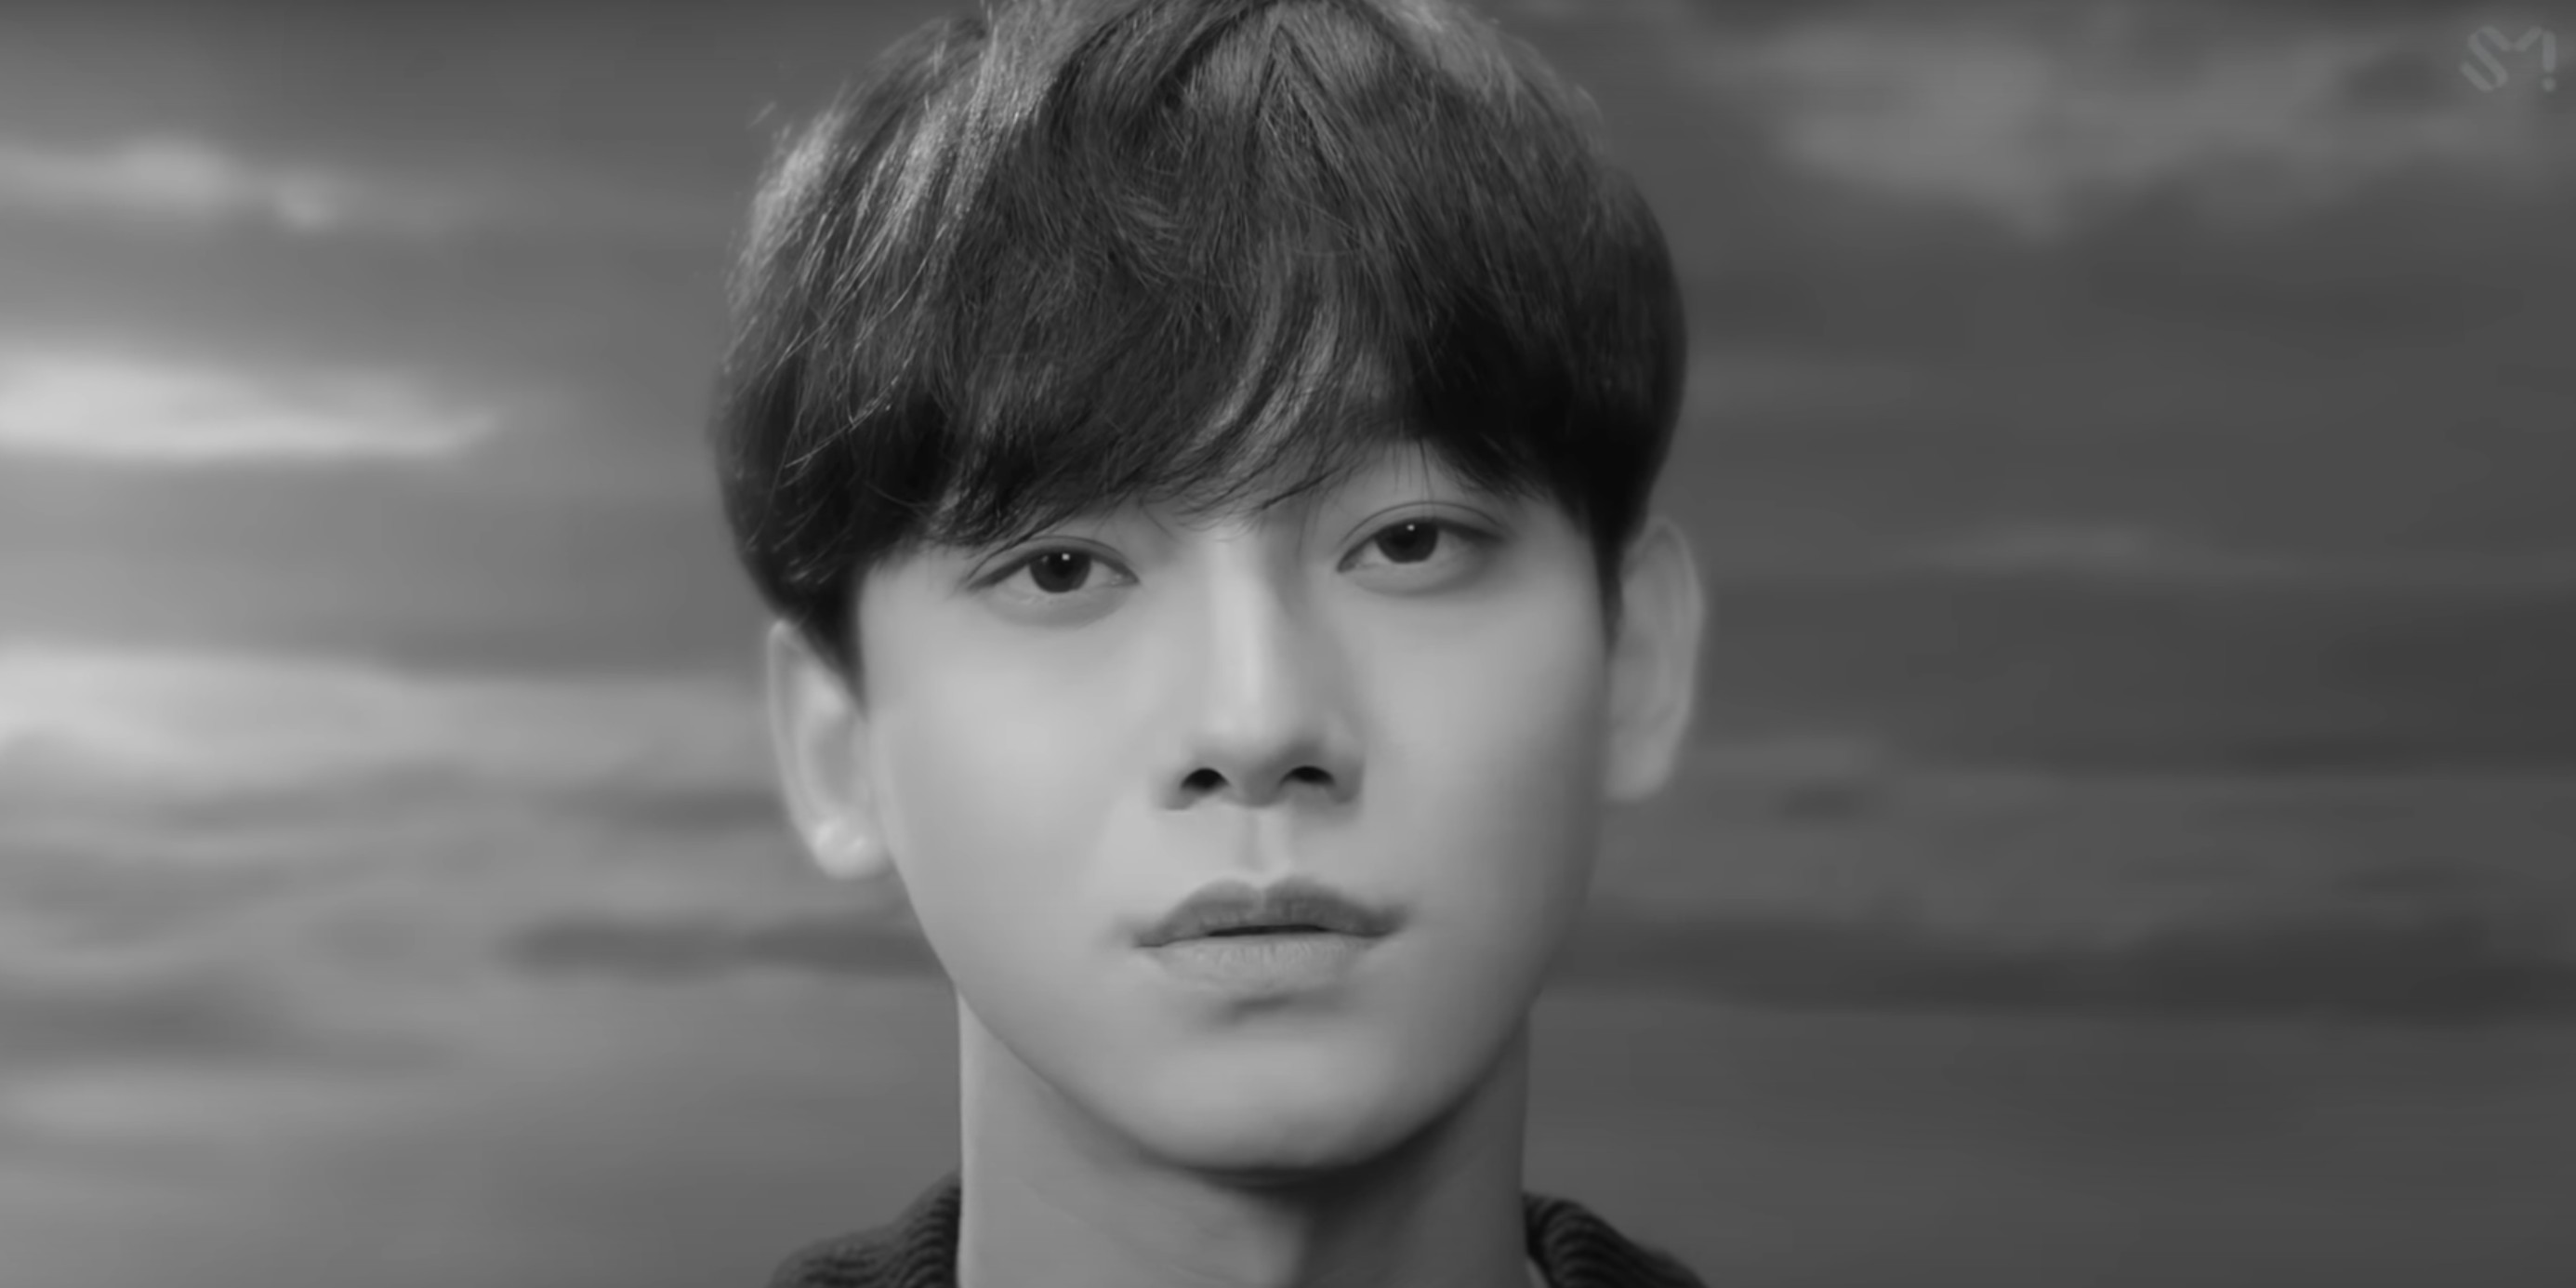 EXO’s Chen drops soulful solo single and music video, ‘Hello’ – watch 